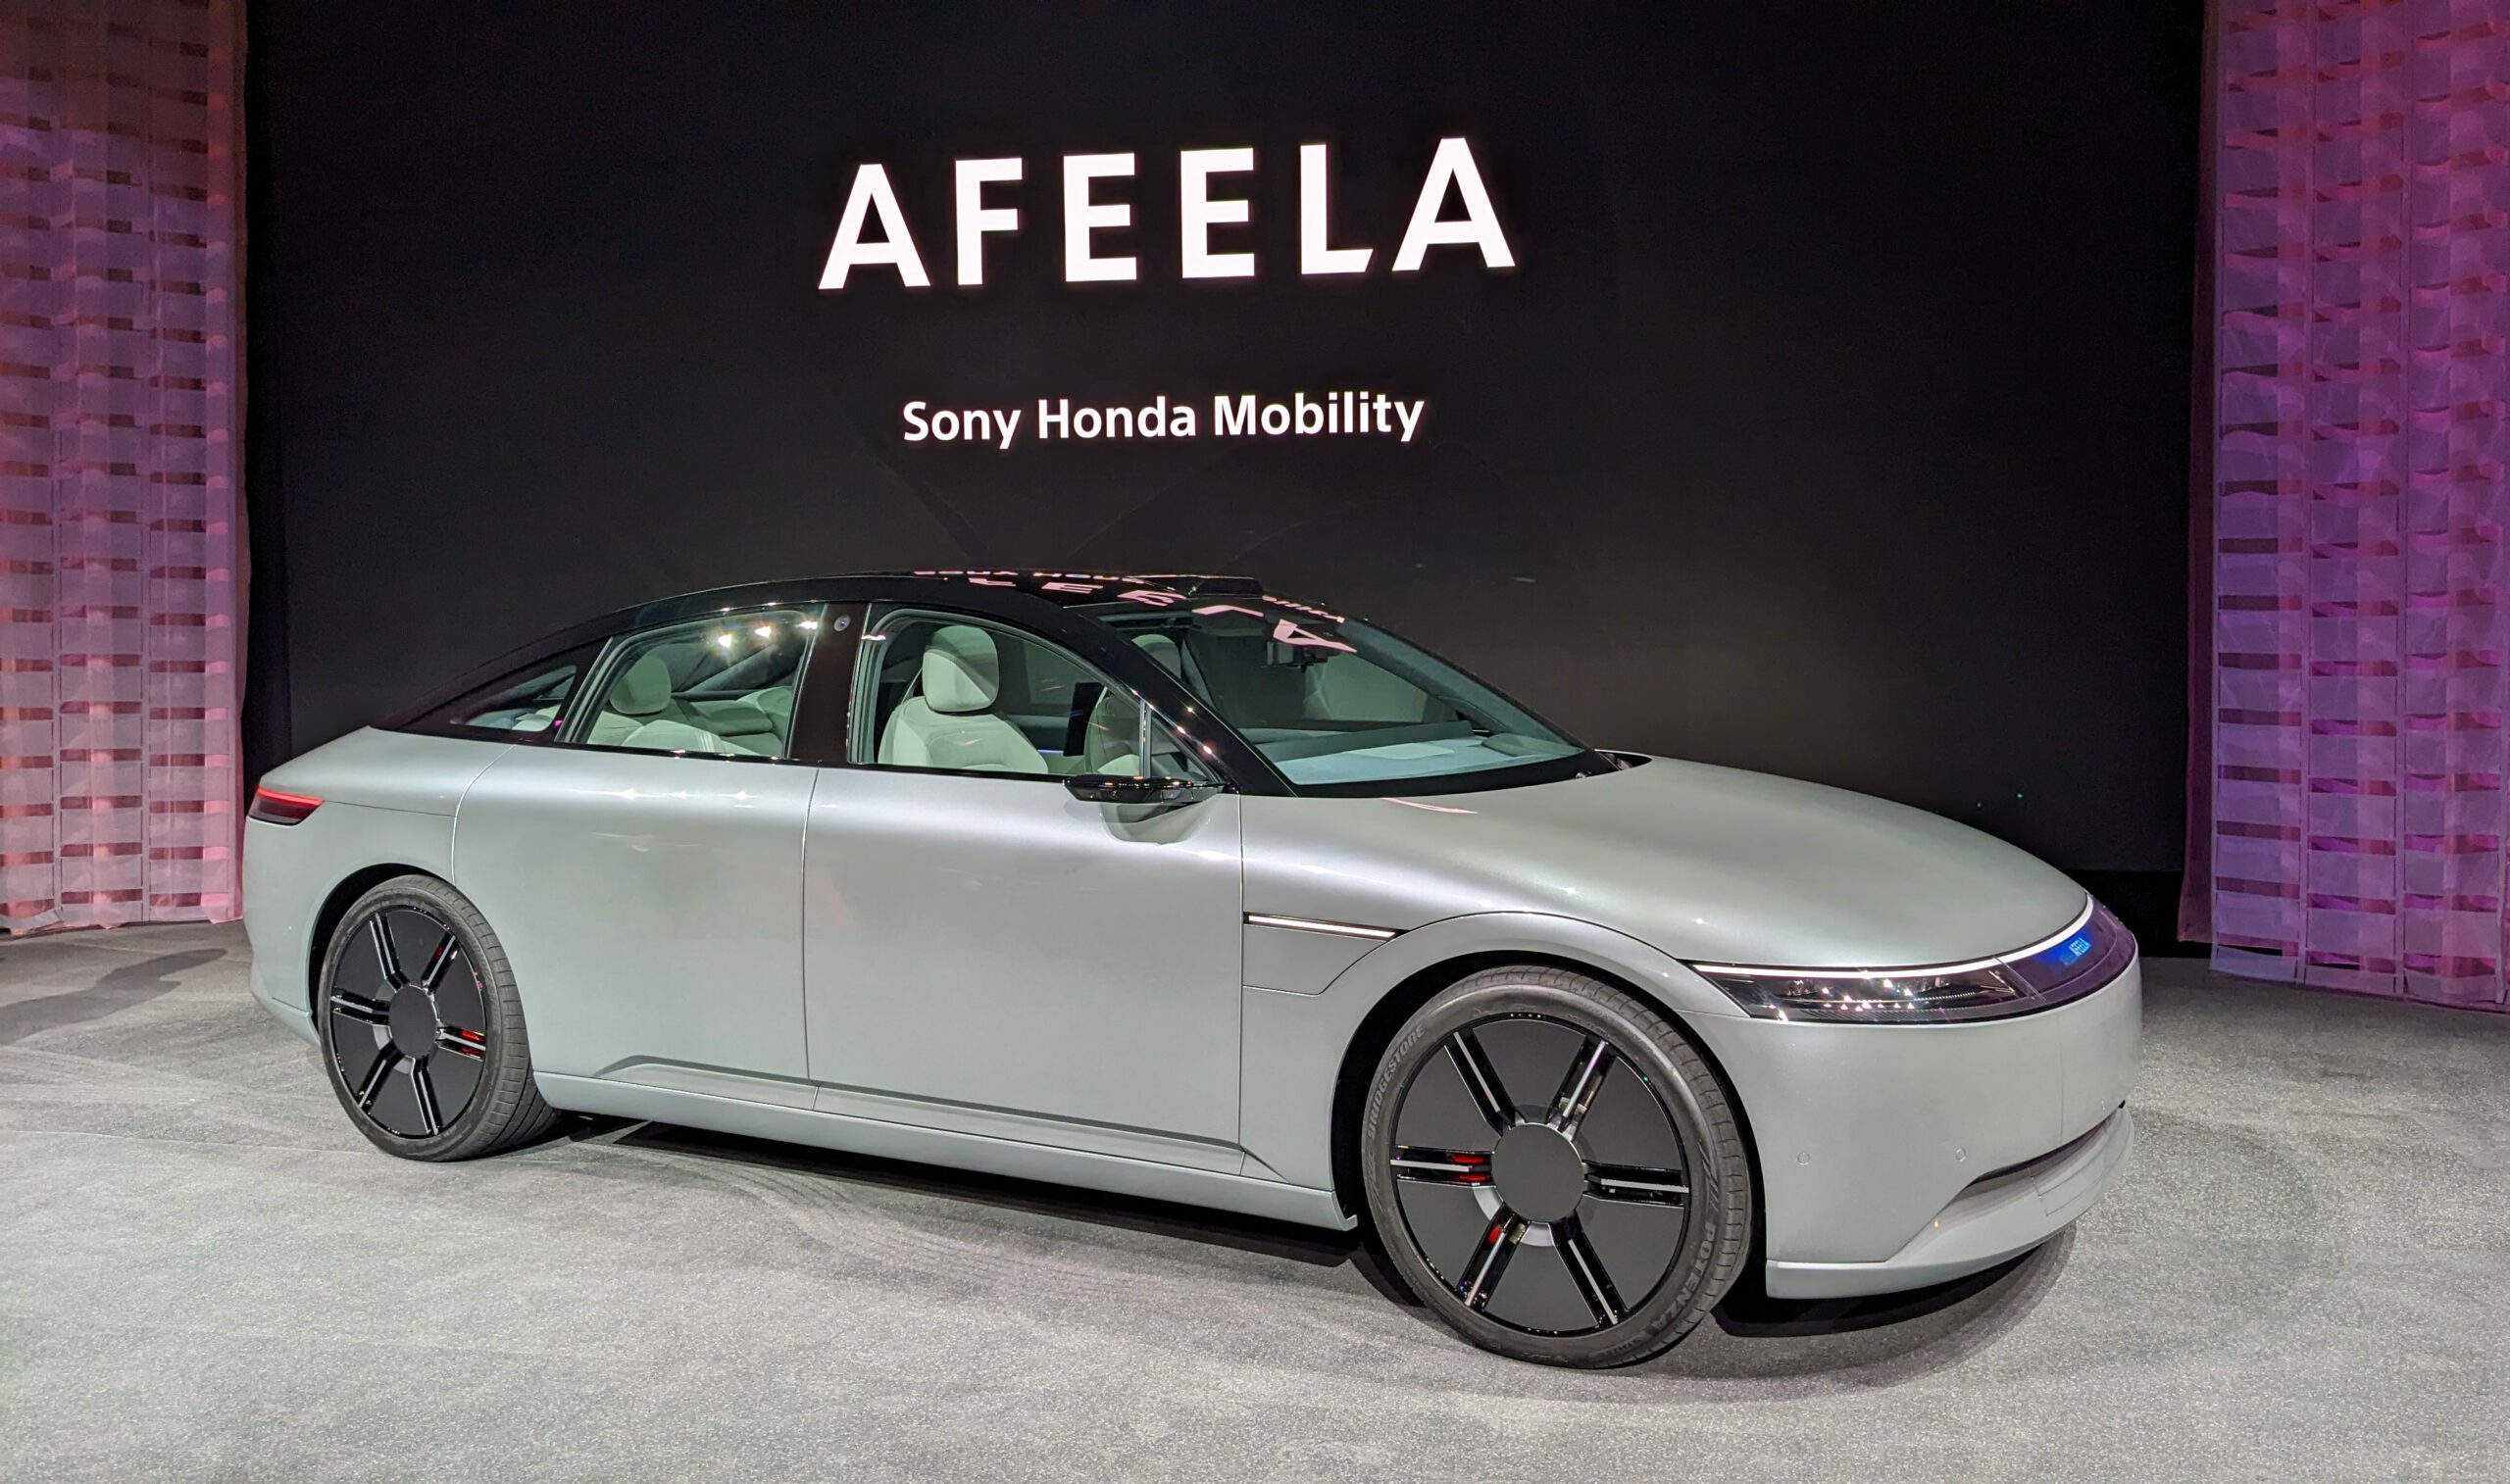 Image source: Engadget. Afeela, a concept electric car jointly launched by Sony and Honda KellyOnTech